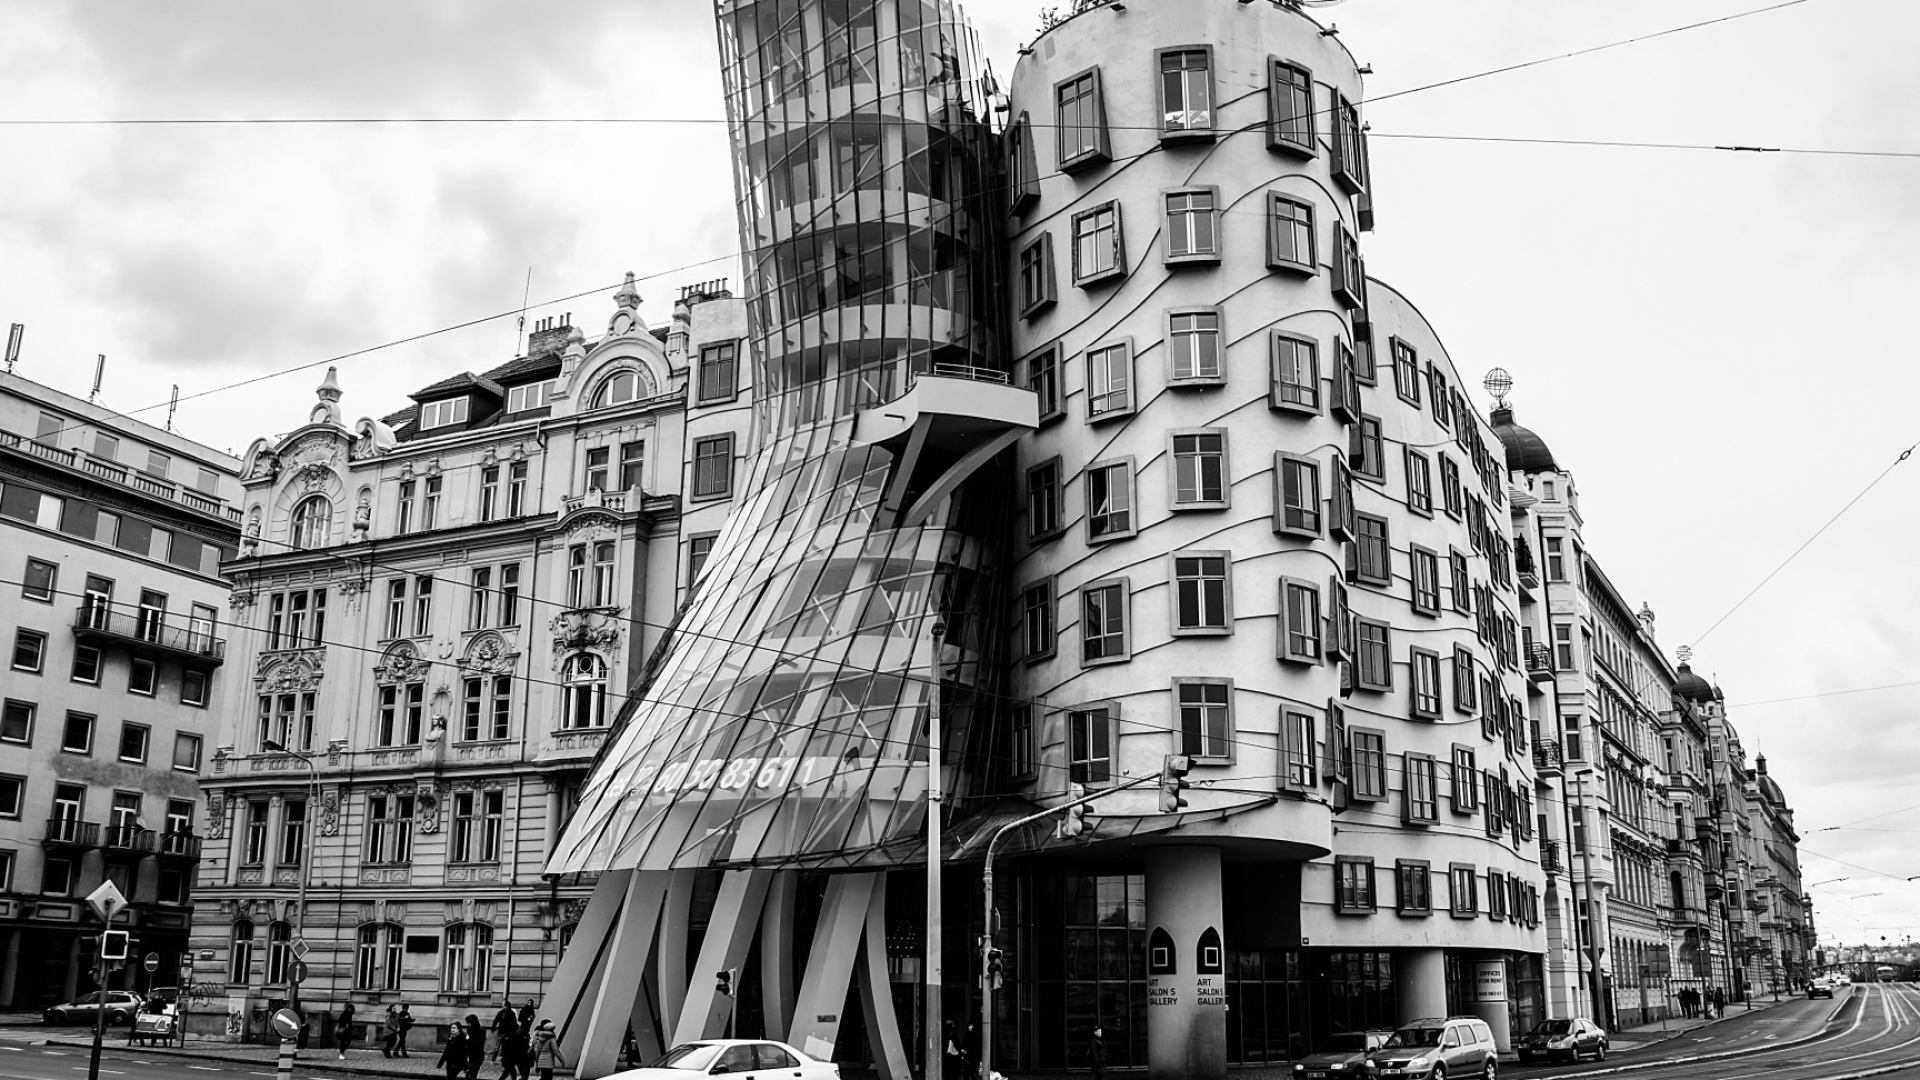 Prague: The Dancing House, a modernist building designed by Frank Gehry and Vlado Milunic. 1920x1080 Full HD Wallpaper.